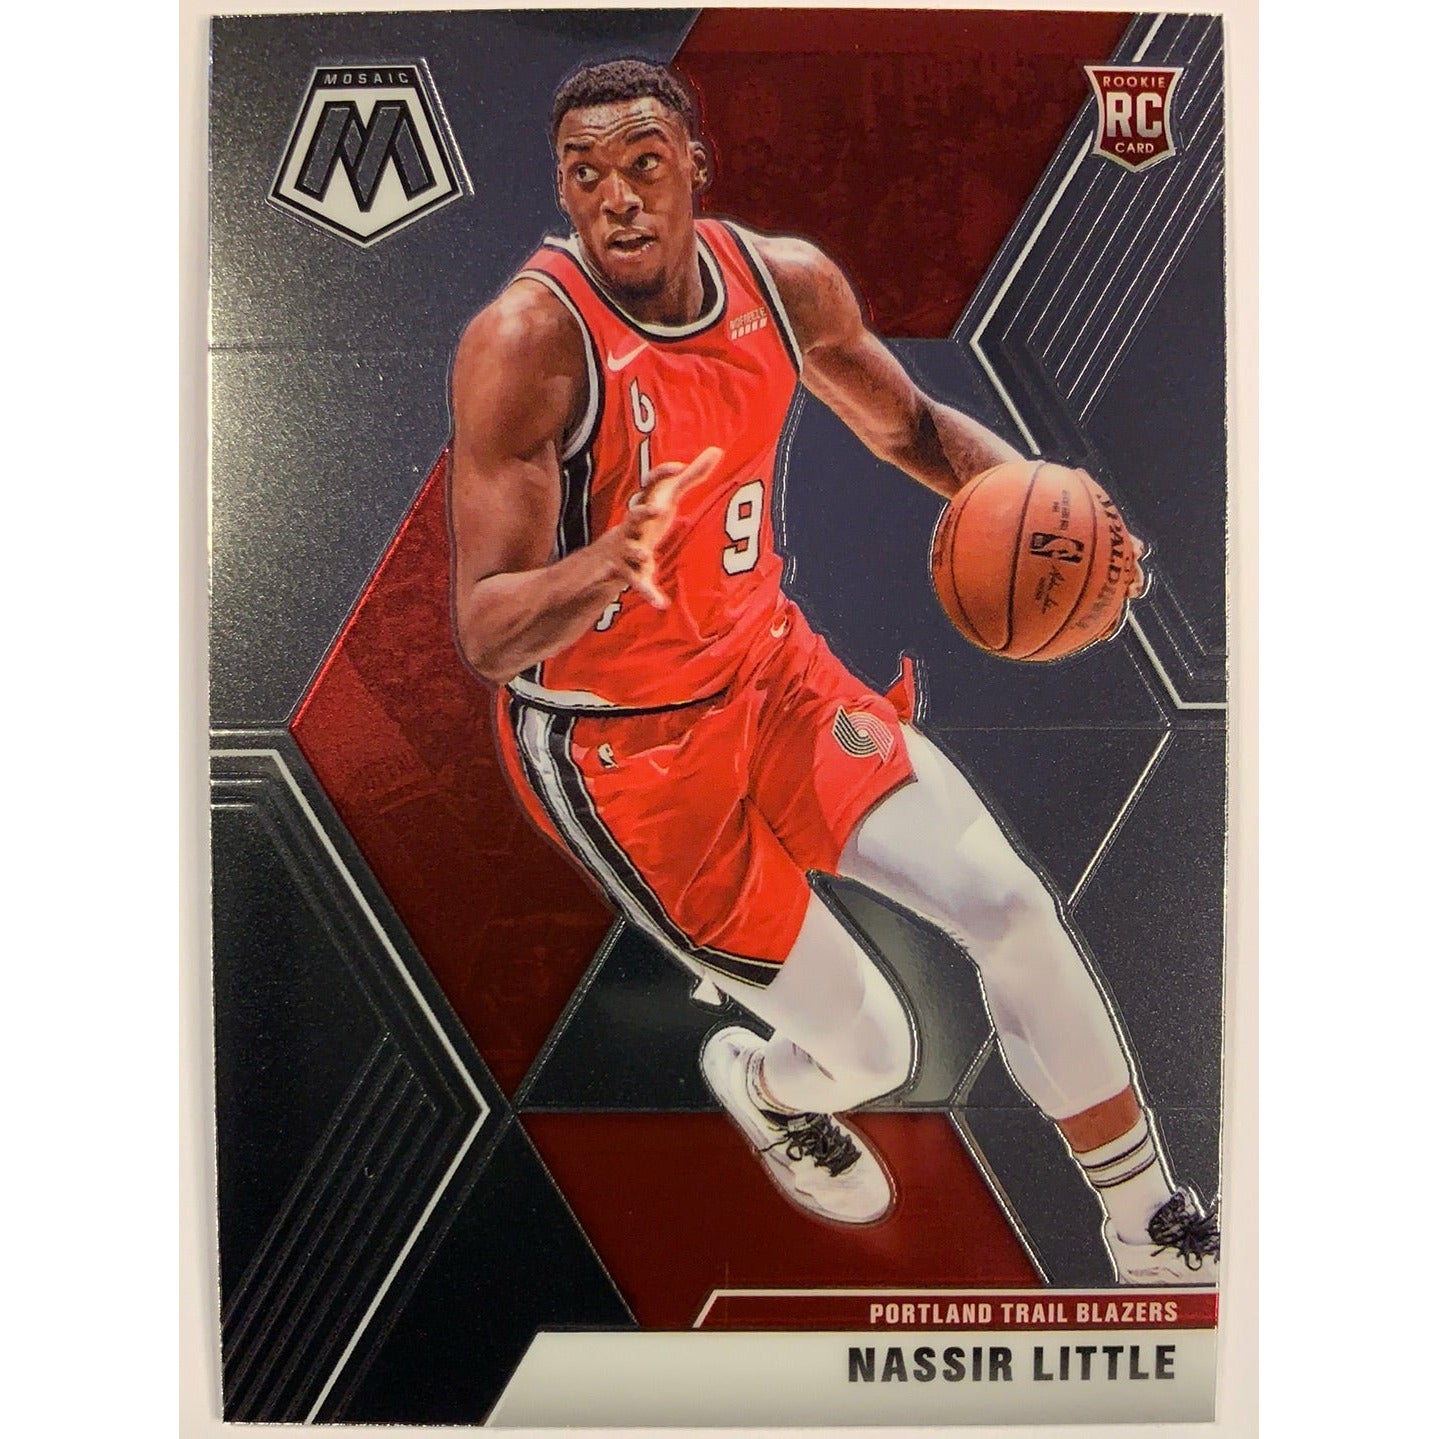  2019-20 Mosaic Nassir Little RC  Local Legends Cards & Collectibles